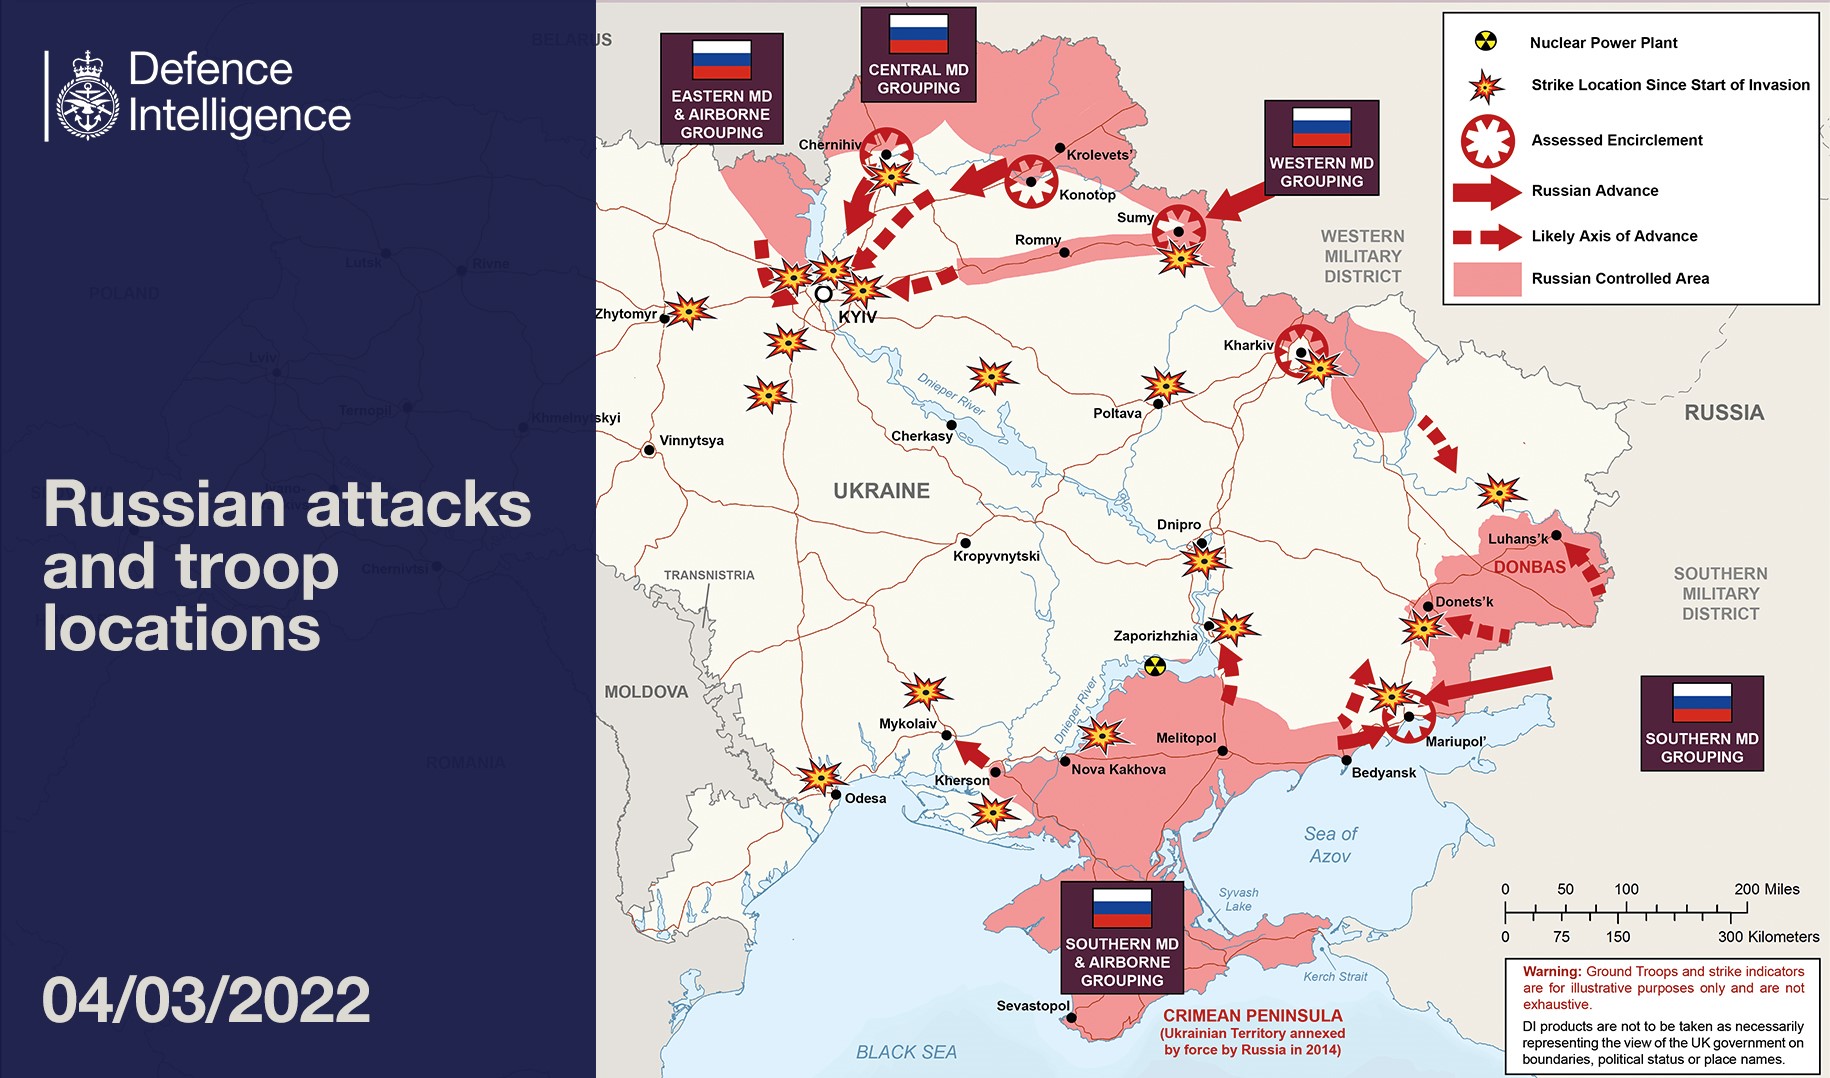 Map is the latest Defence Intelligence update on the situation in Ukraine on March 4, 2022.